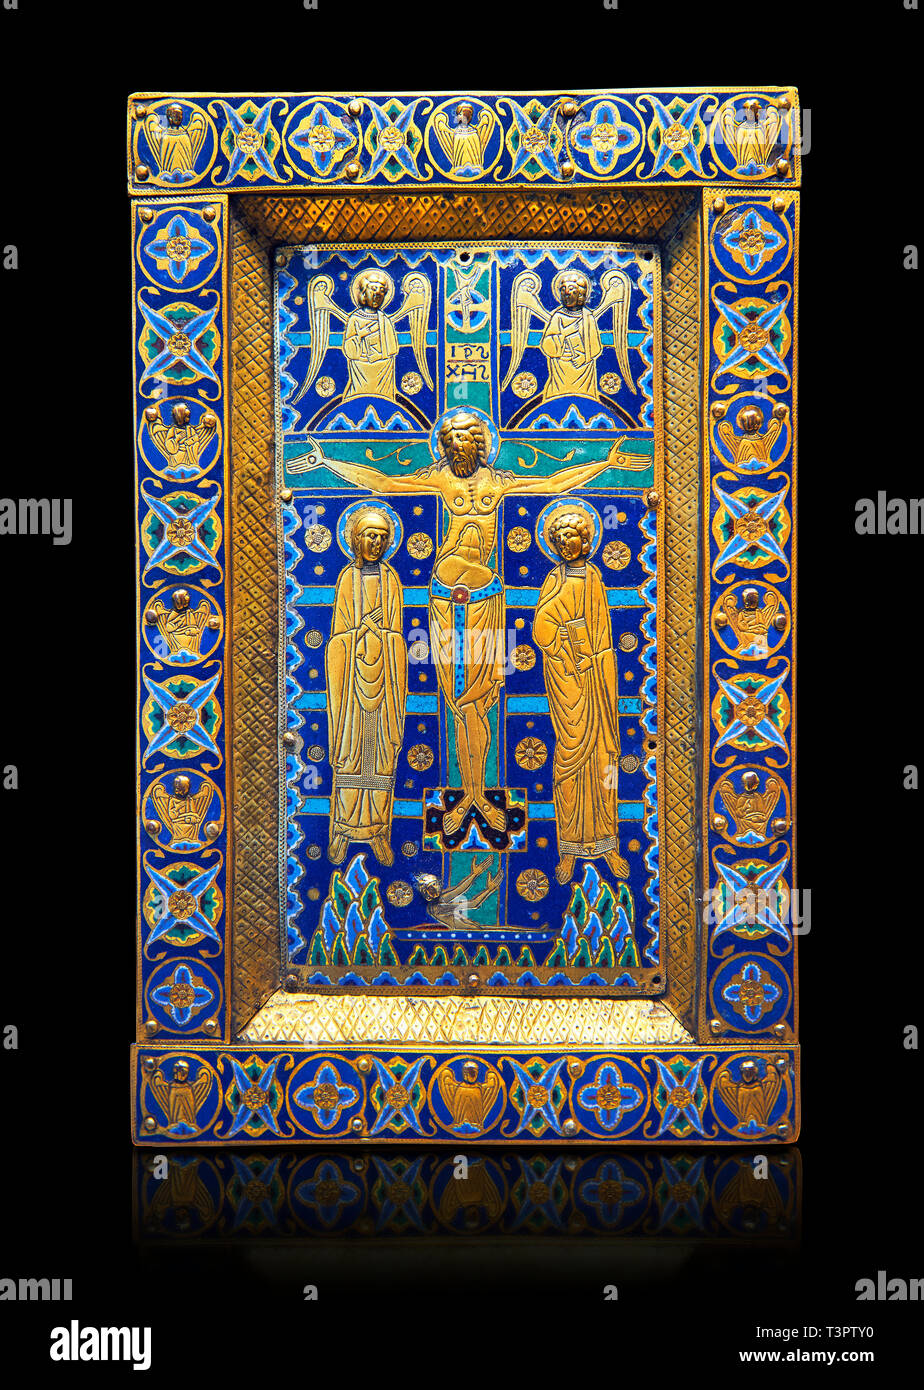 Medieval enamelled panel depicting the Crucifixion, end of 12th cent from Limoges, enamel on gold. AD. Inv OA 7285, The Louvre Museum, Paris. Stock Photo